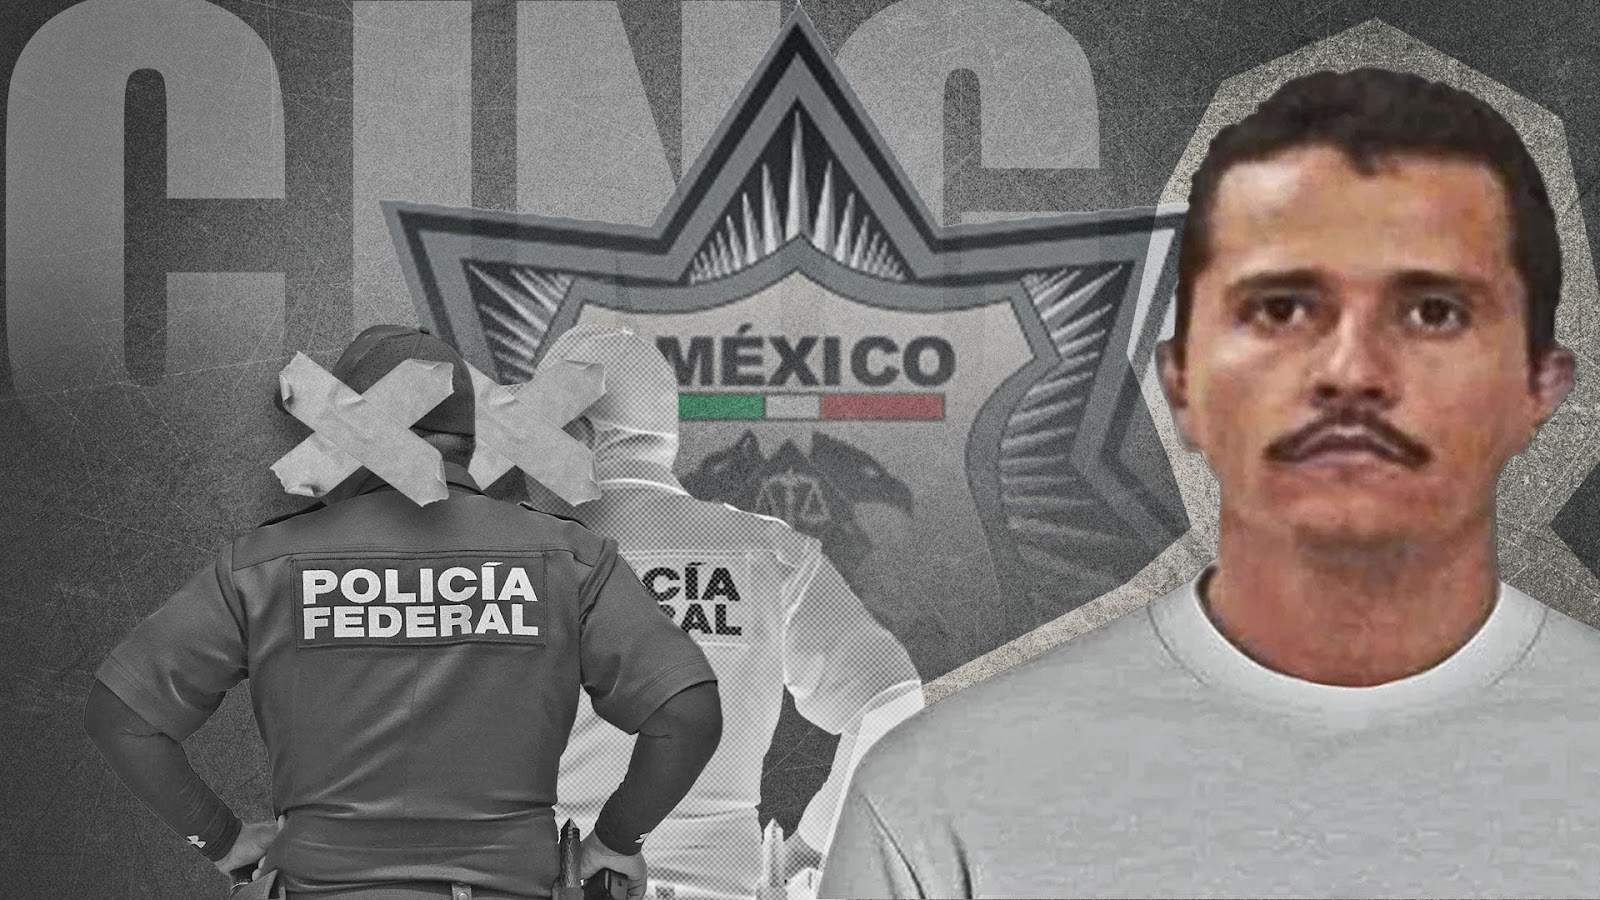 VIDEO Nemesio Oseguera brother Don Rodo arrested by Mexican police